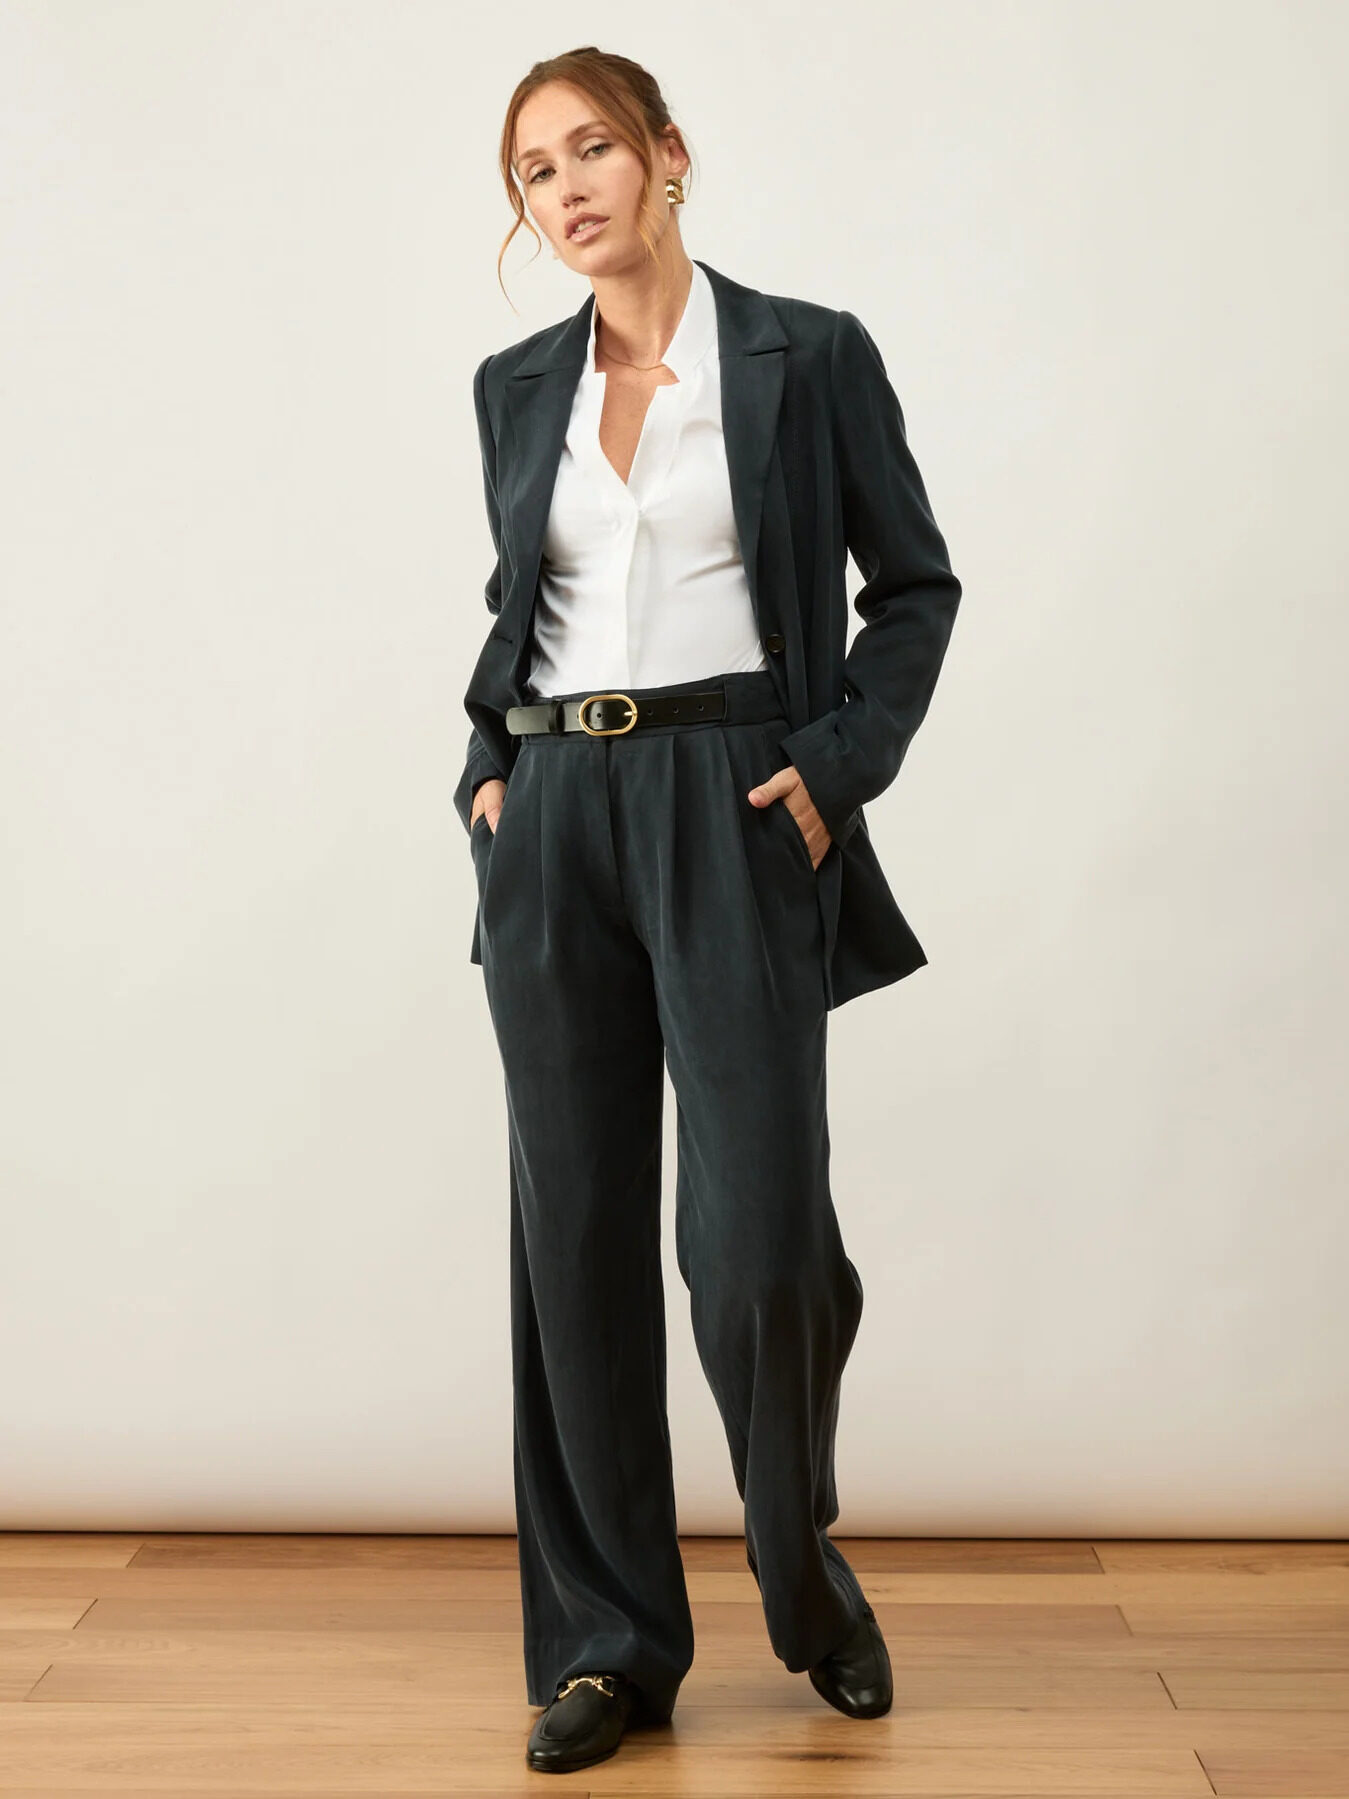 The model is wearing a white shirt and black trousers.